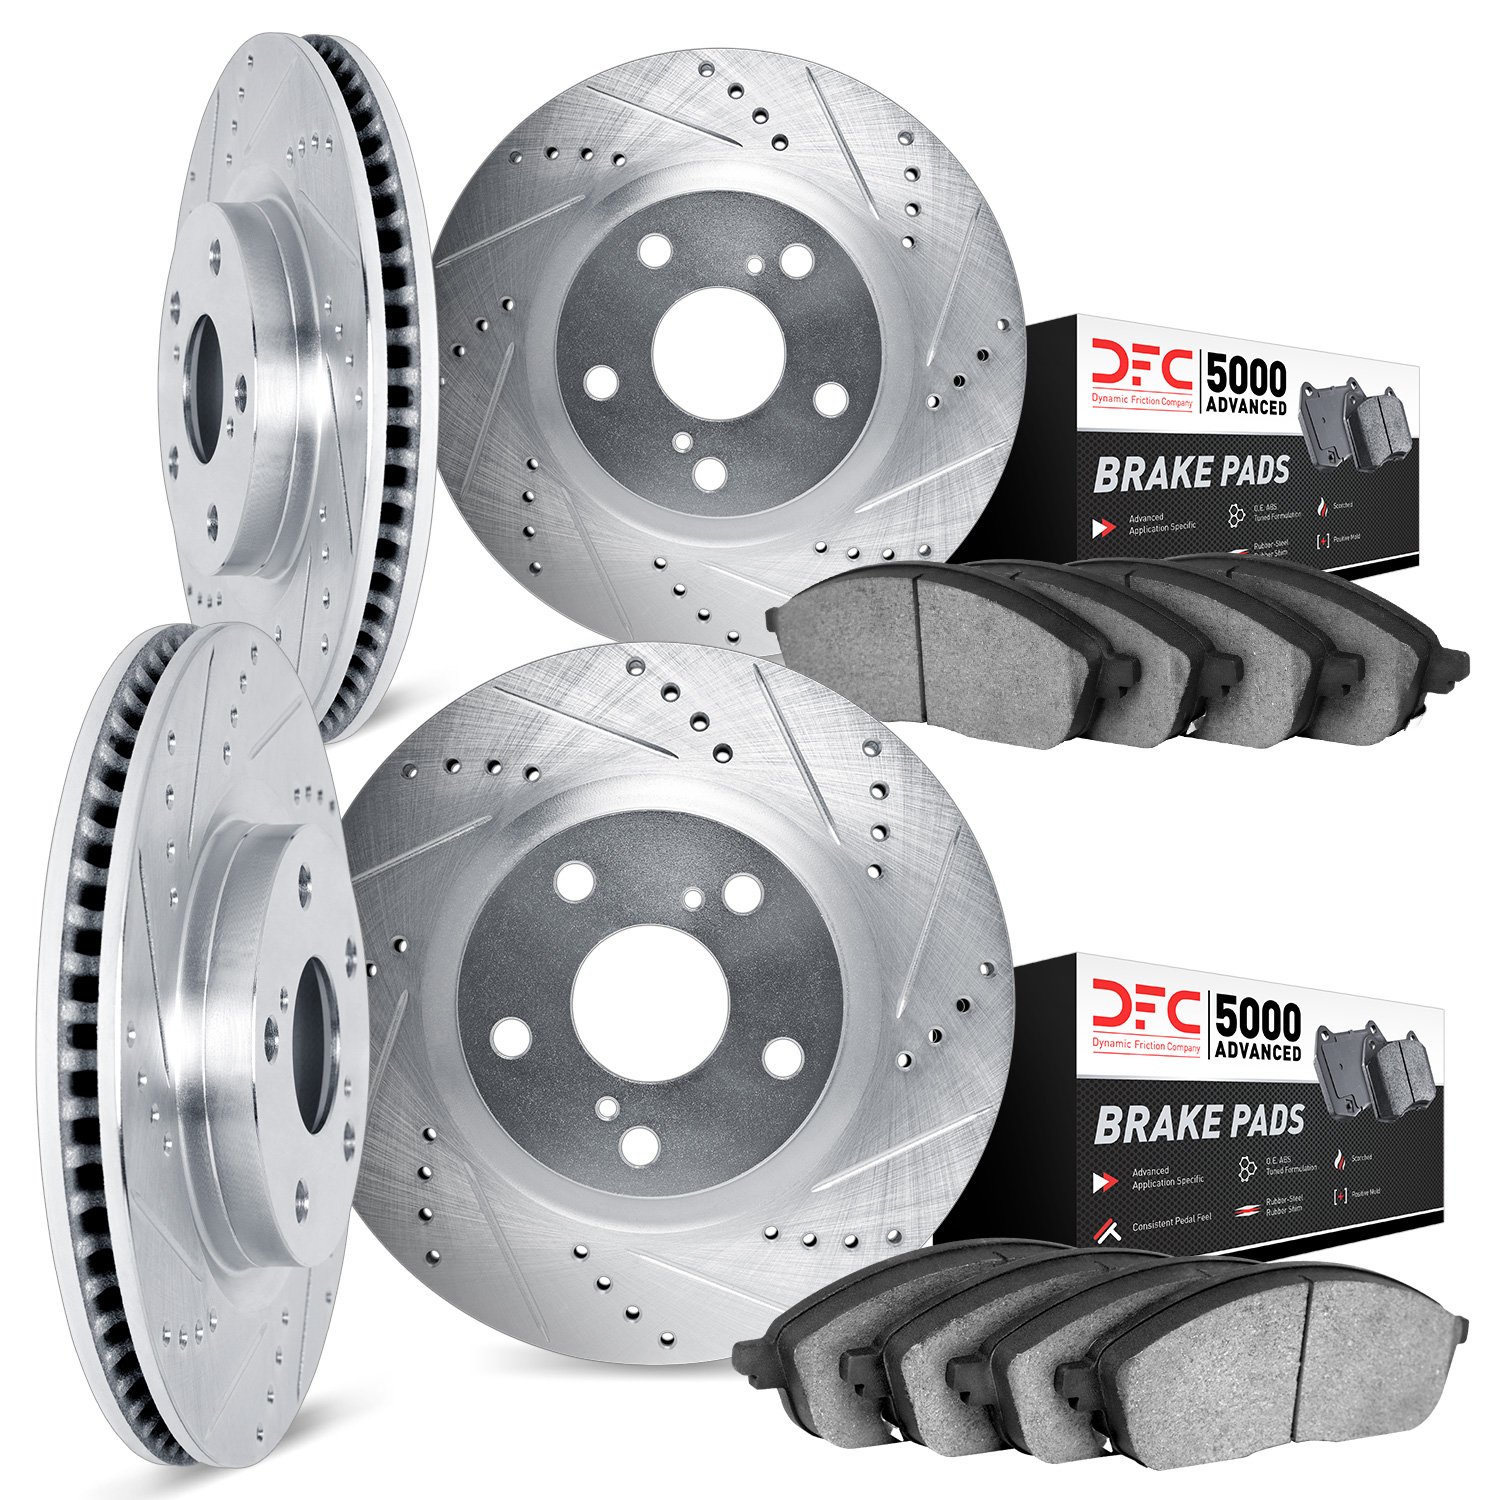 7504-13019 Drilled/Slotted Brake Rotors w/5000 Advanced Brake Pads Kit [Silver], Fits Select Subaru, Position: Front and Rear